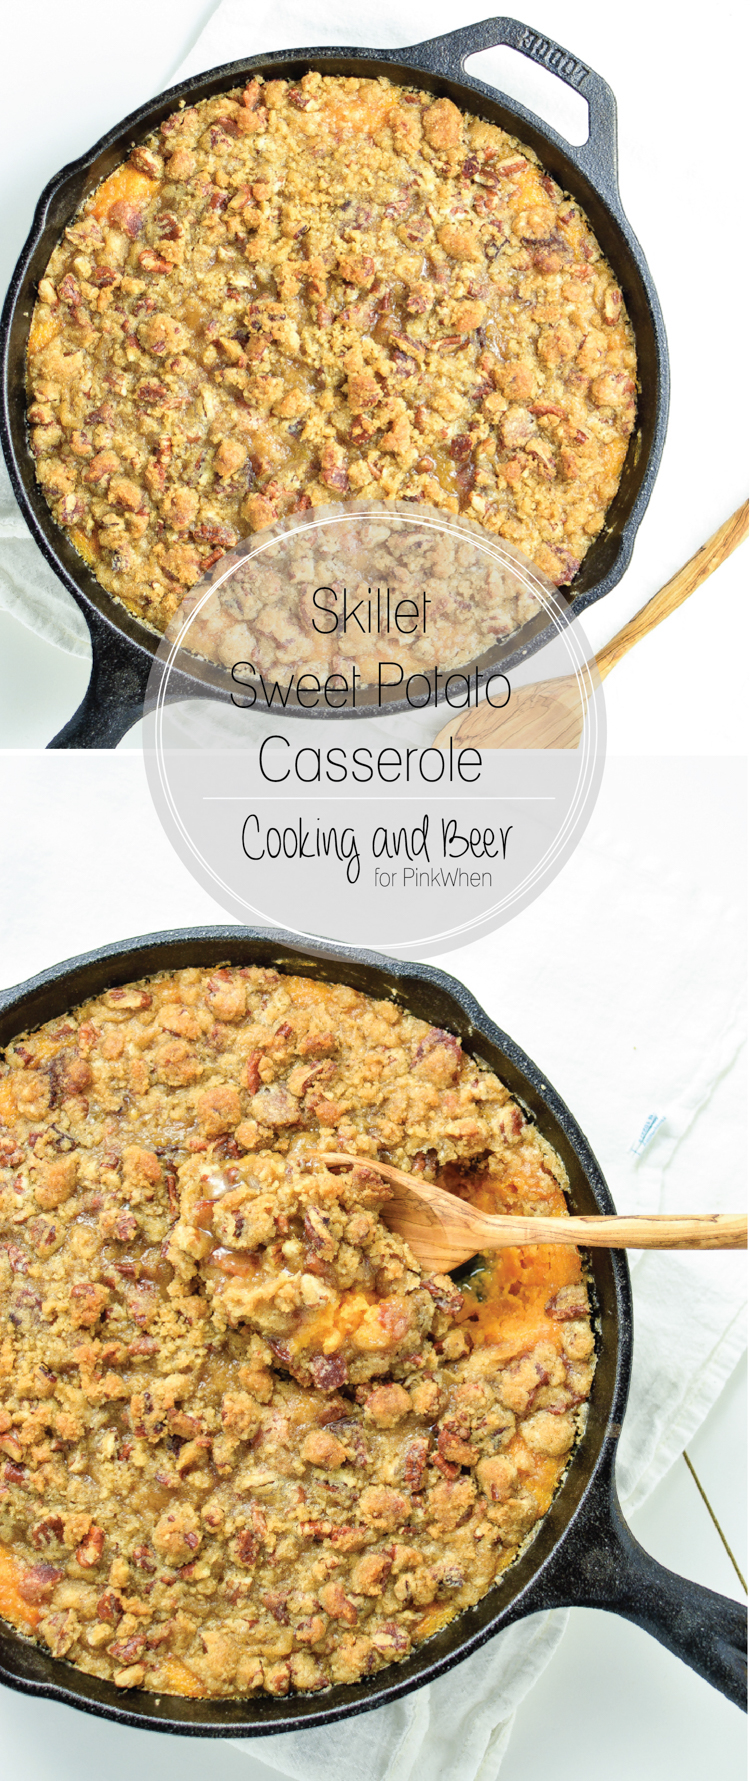 Skillet Sweet Potato Casserole with Bacon, Brown Sugar Crumble: a must-have side dish recipe of your Thanksgiving dinner spreads!